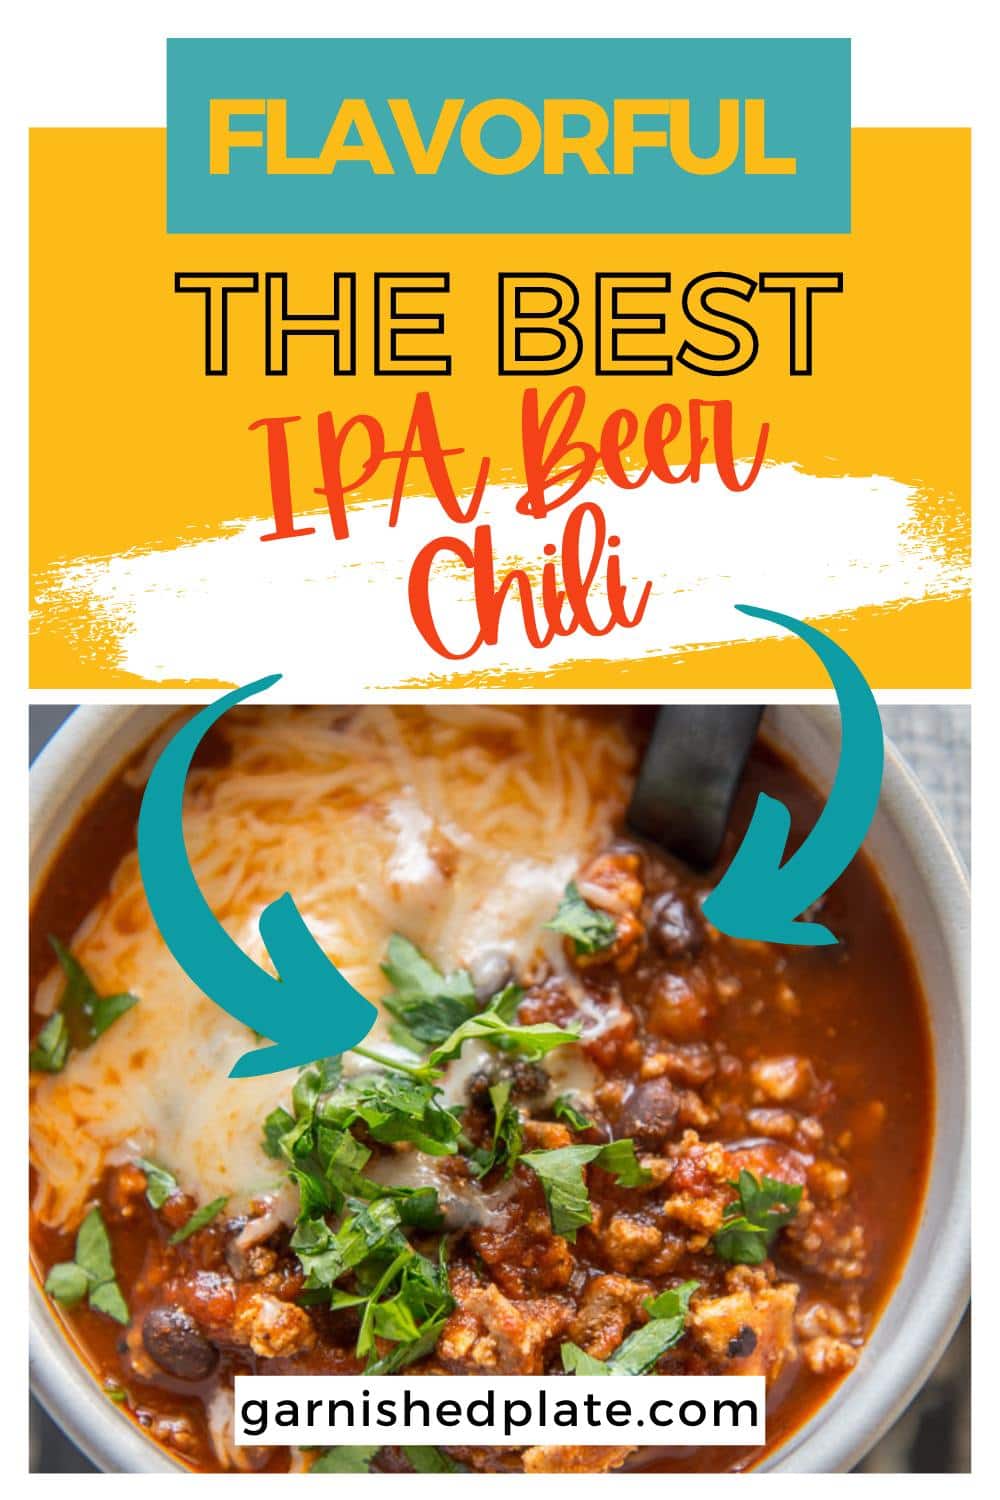 The Best IPA Beer Chili - Garnished Plate